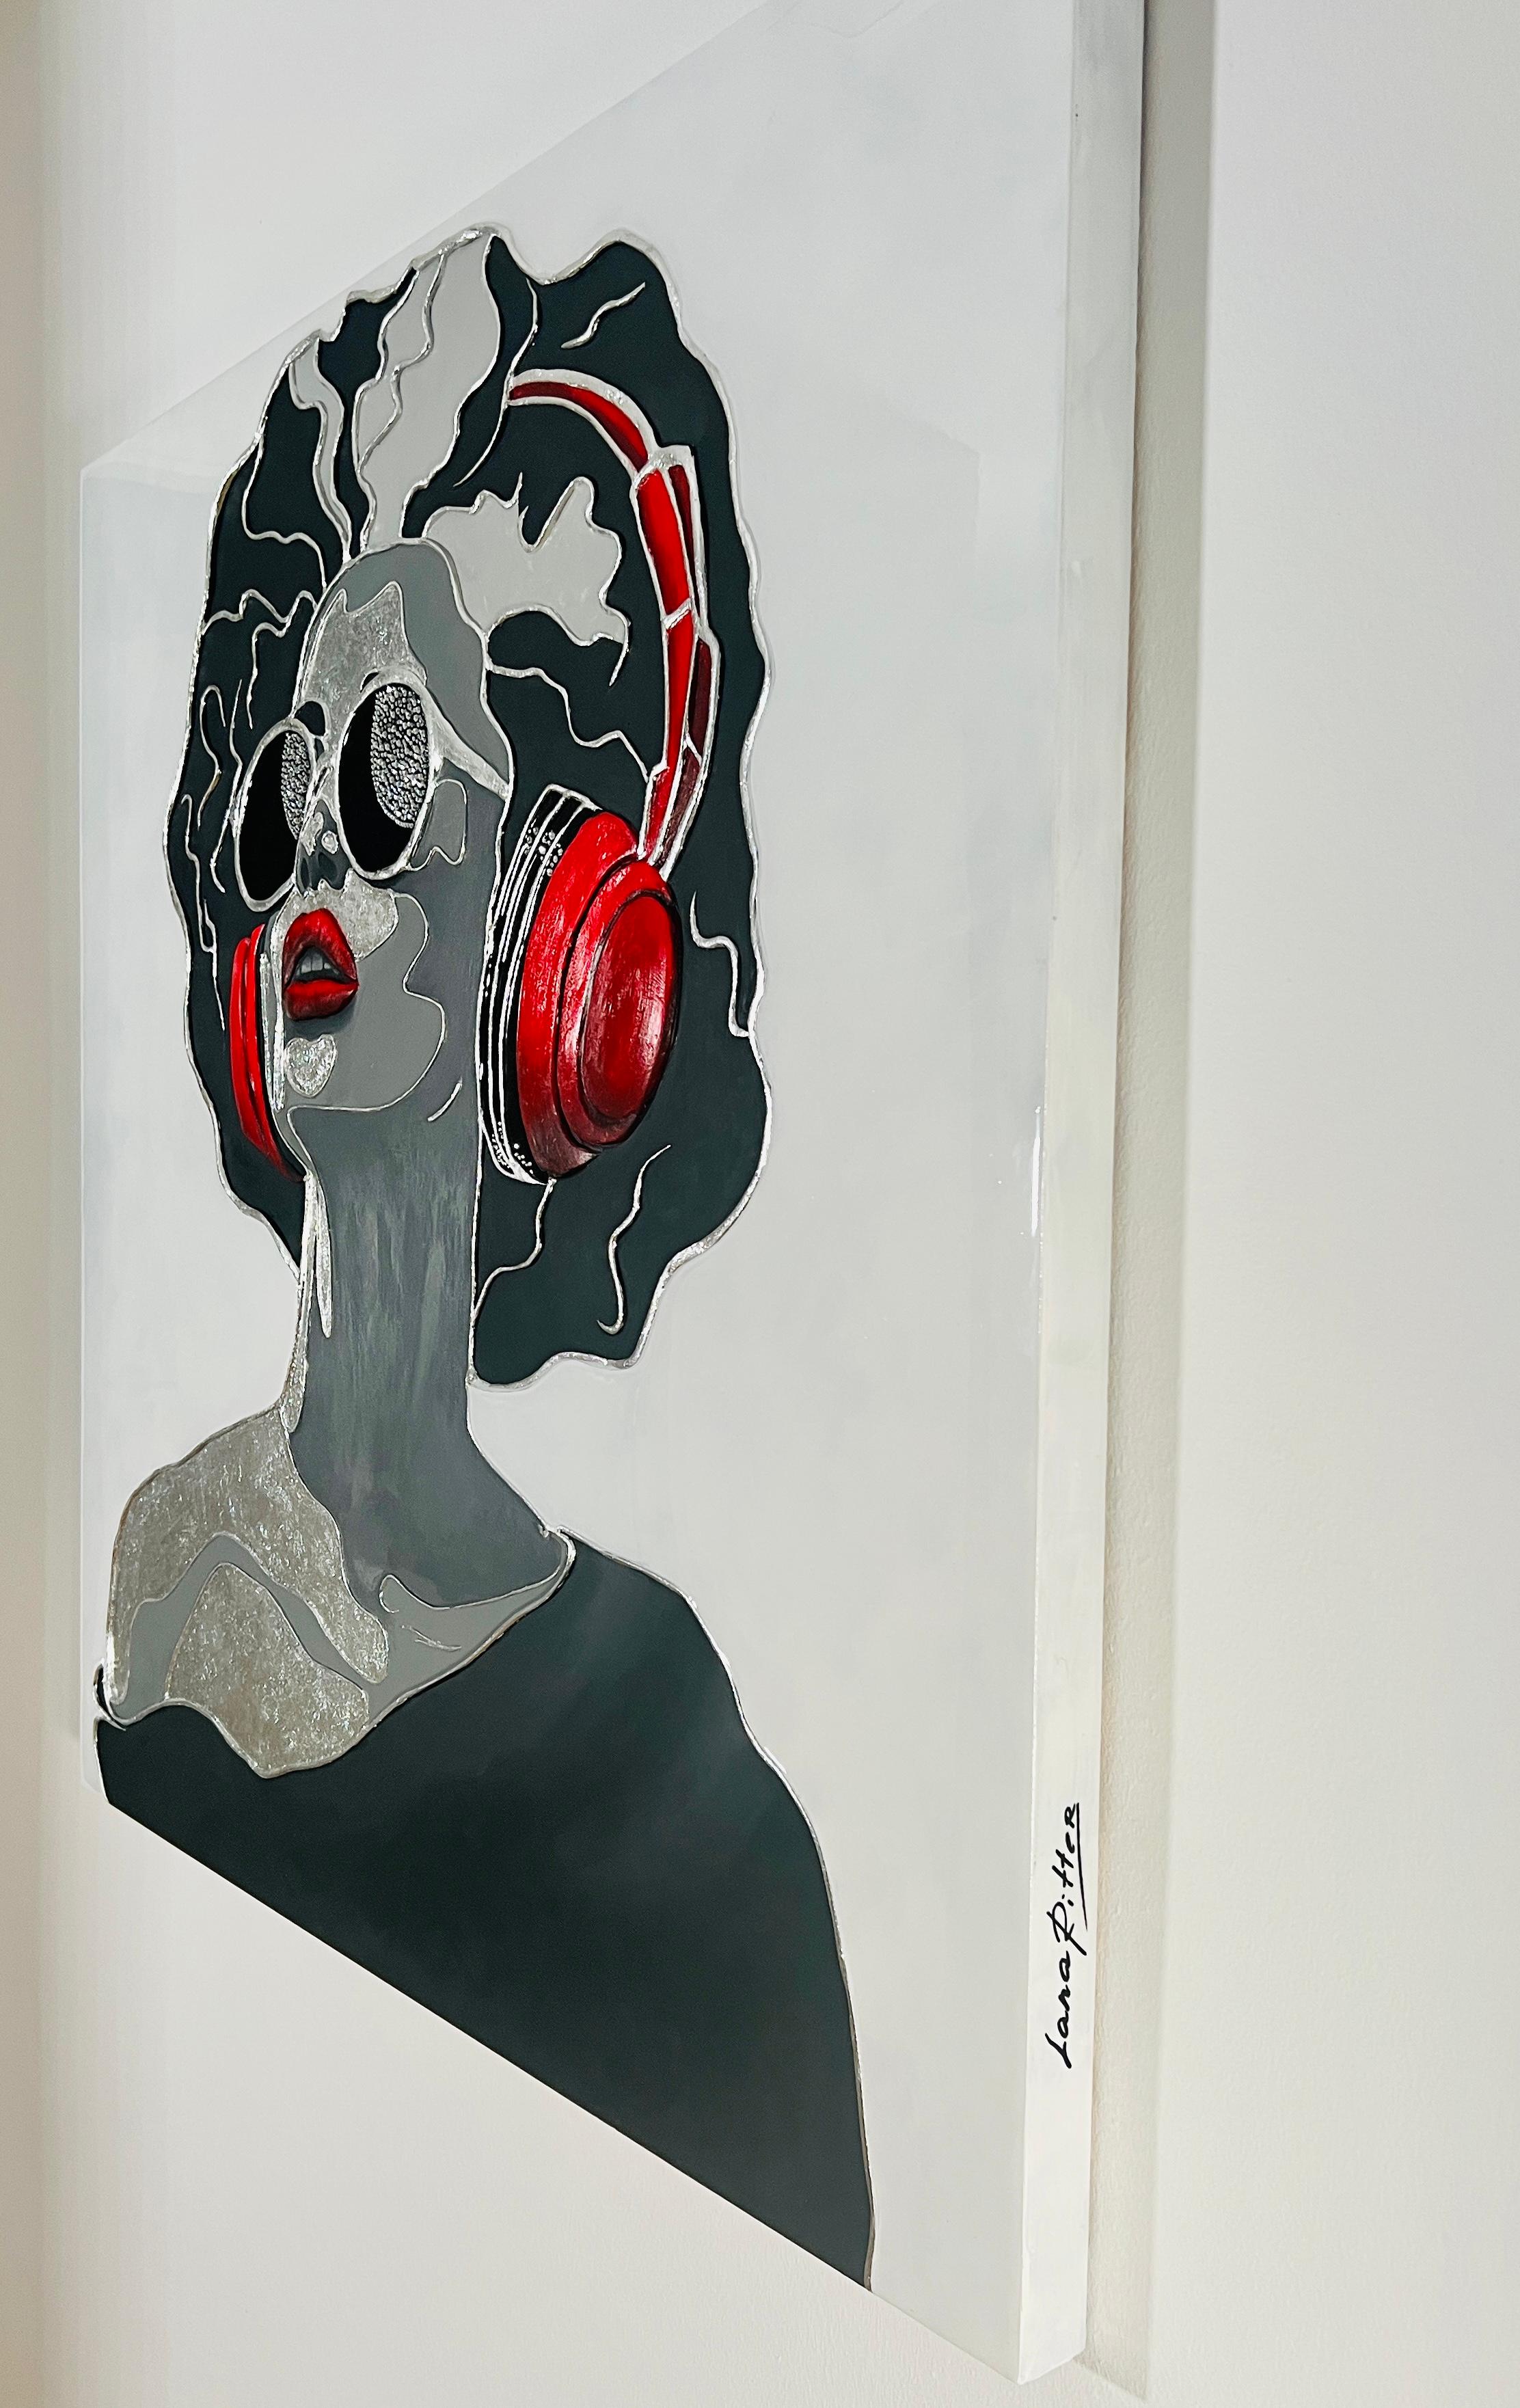 Red, White, Black and Music. Sculptural 3D artwork - Pop Art Painting by Lana Ritter